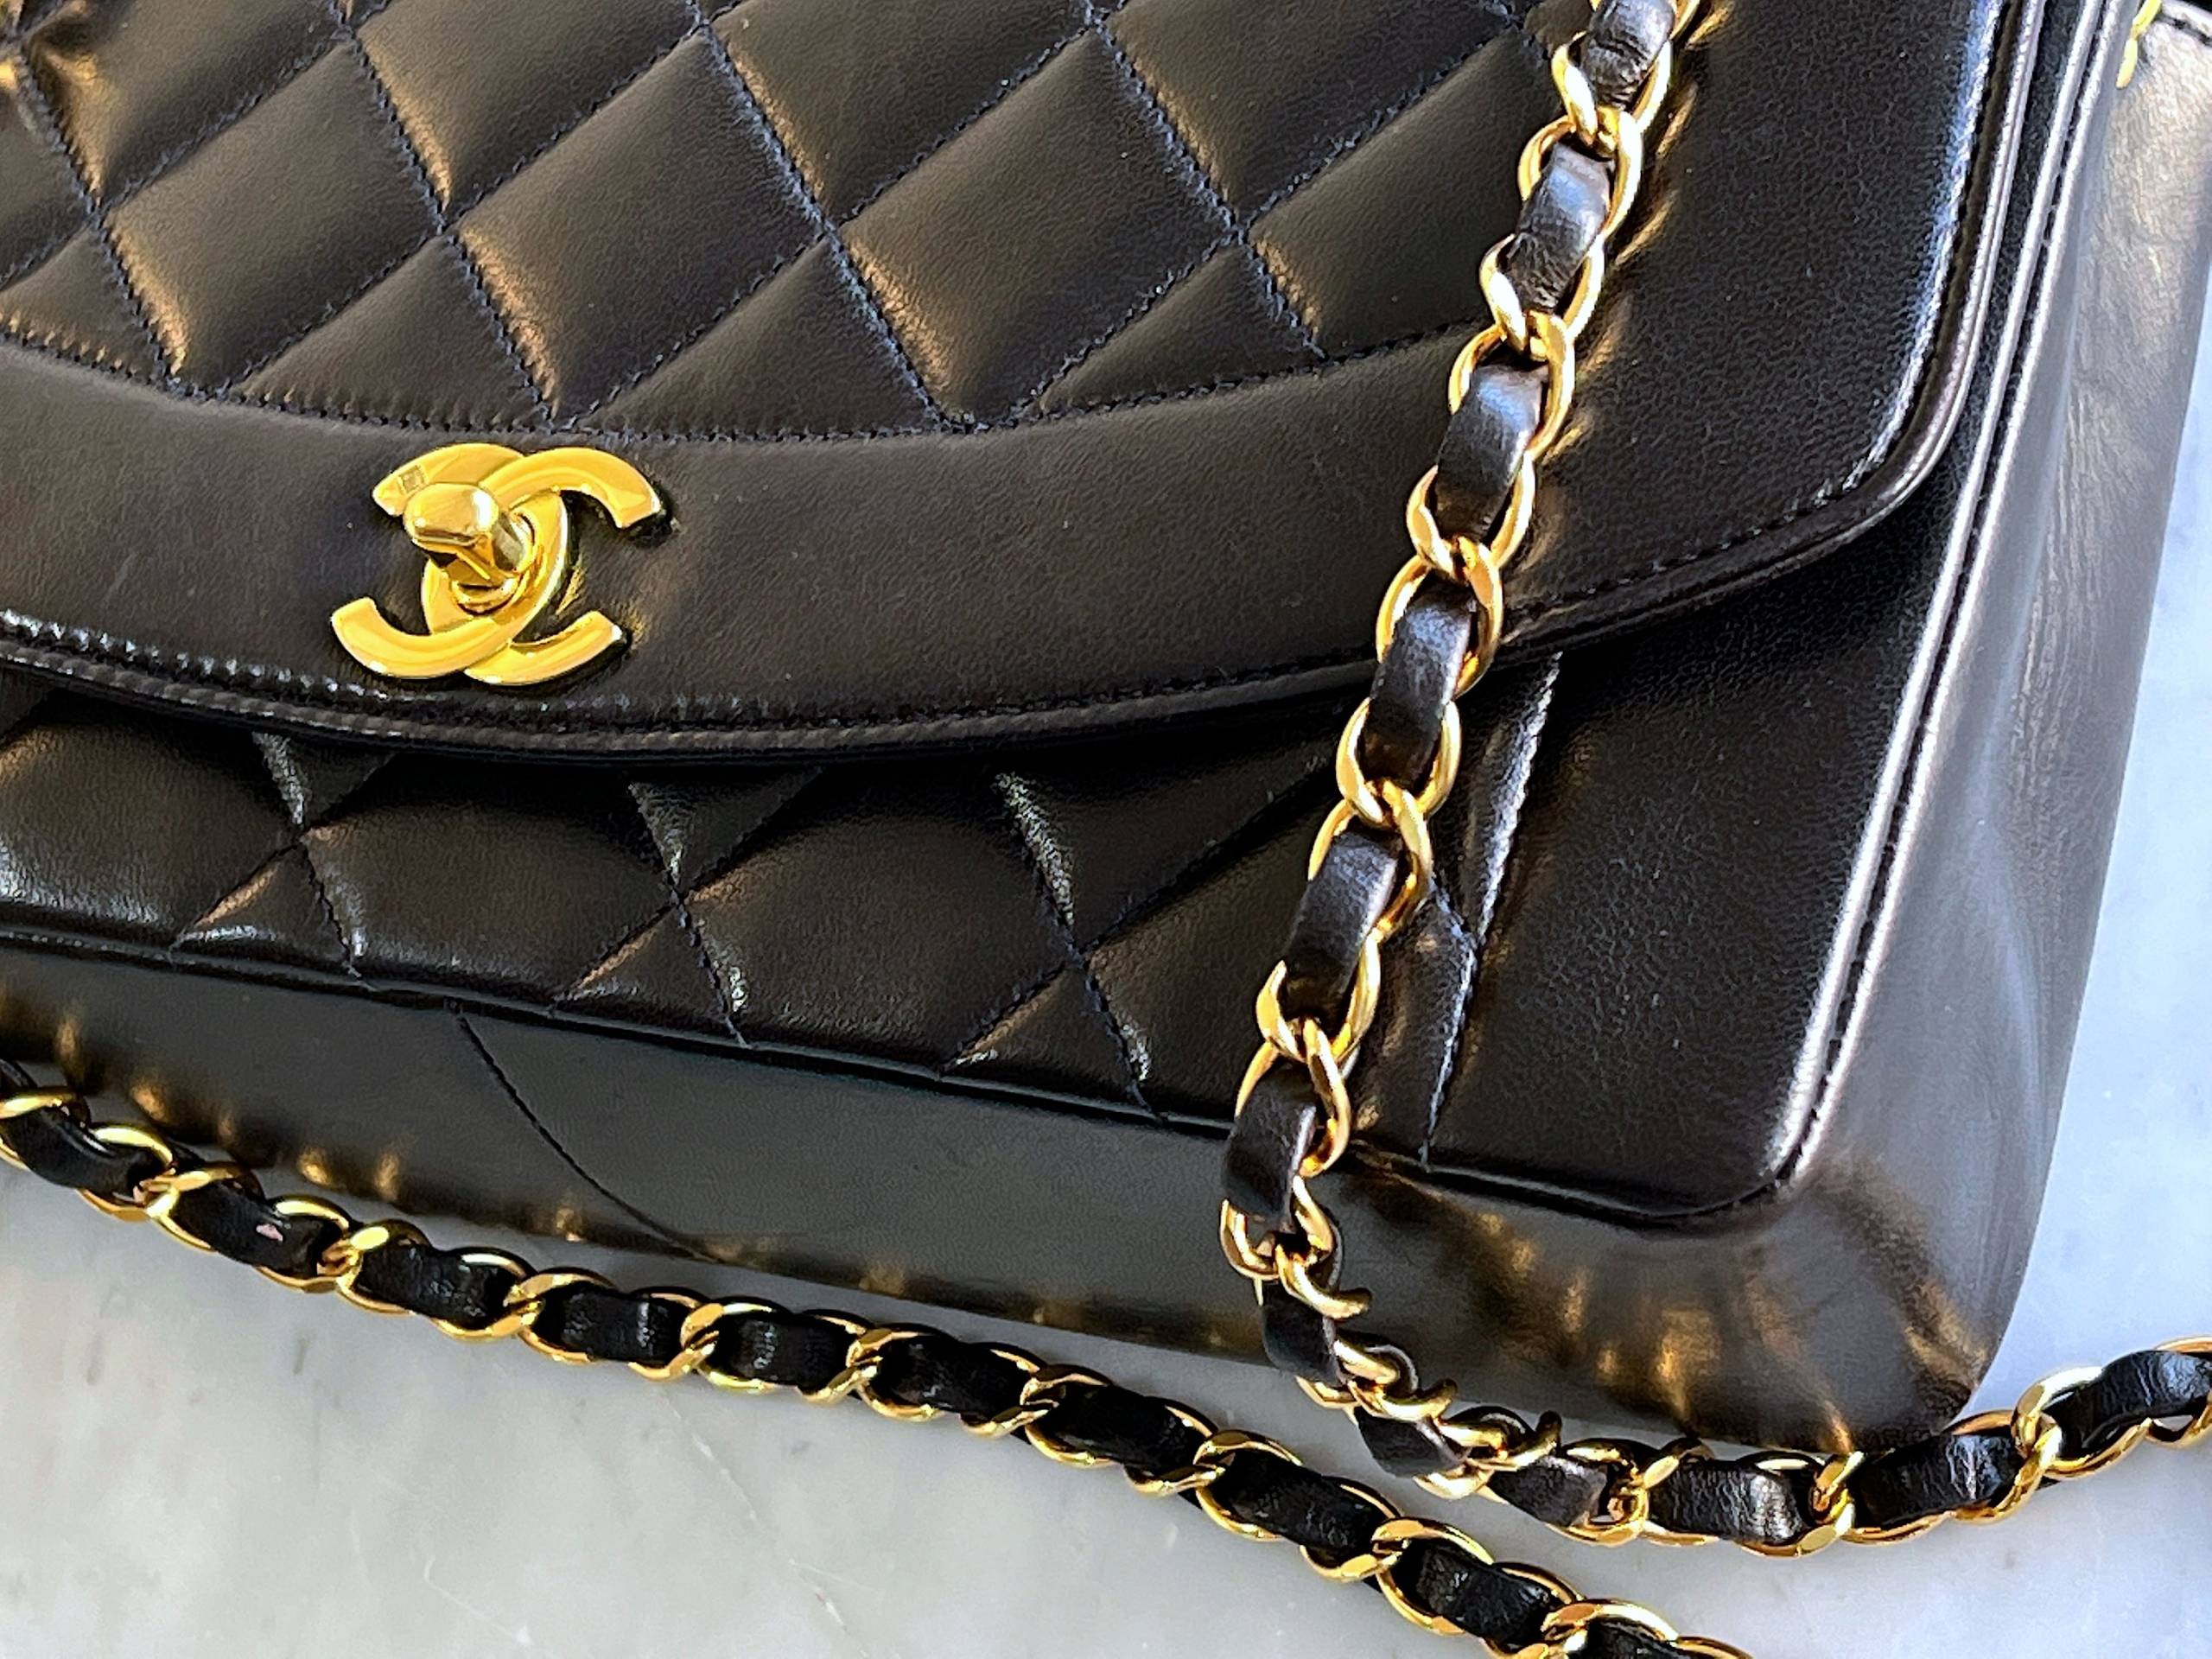 Found a vintage Chanel bag on the floor of my local GW! : r